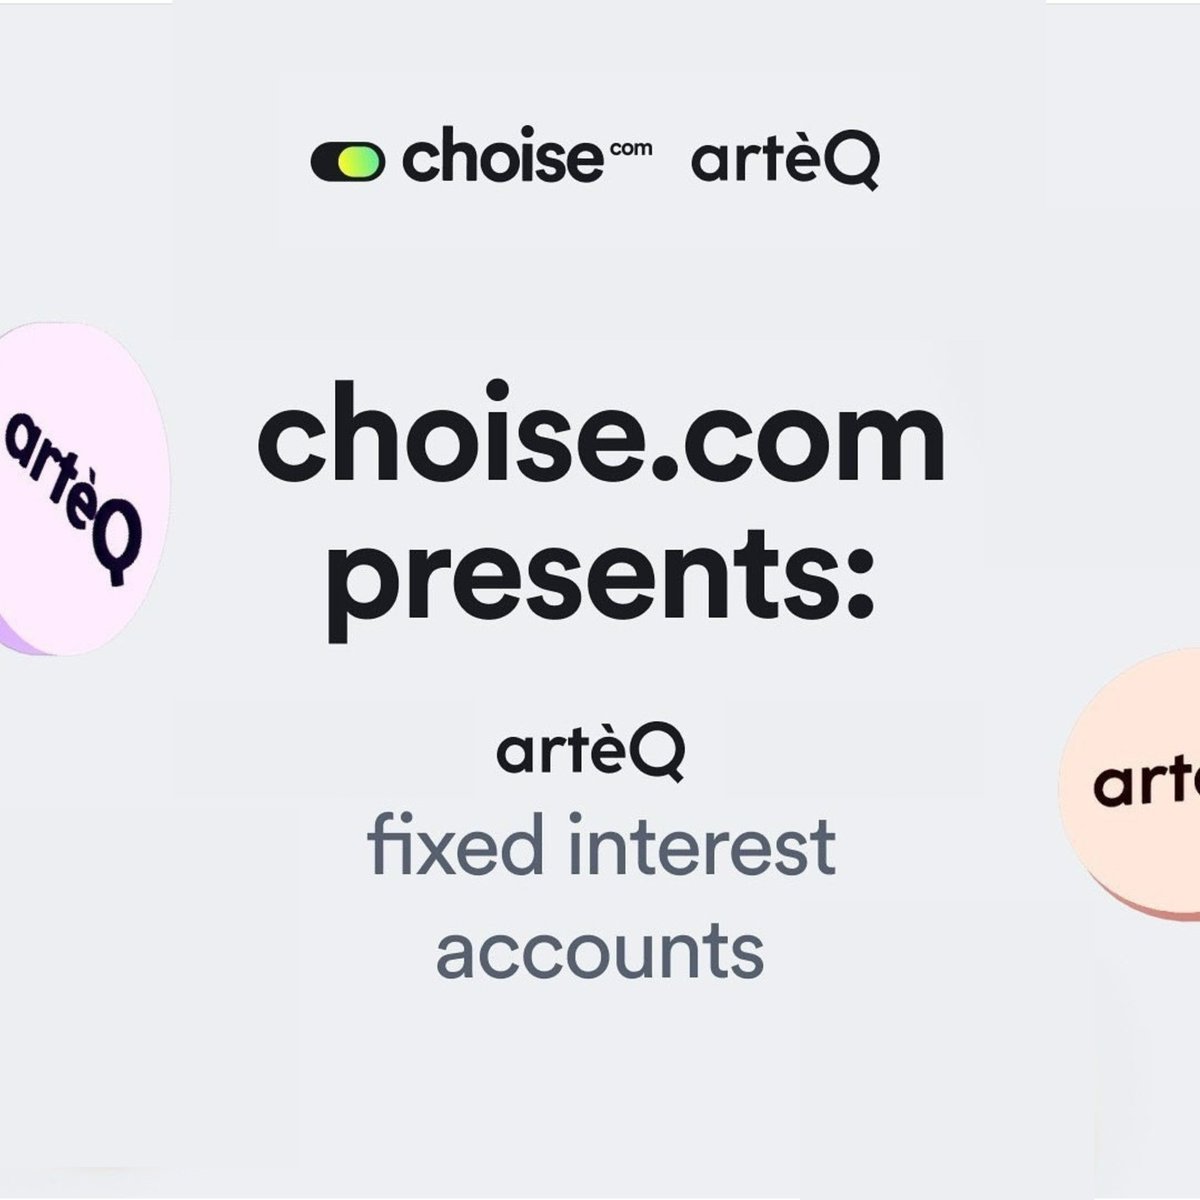 $ARTEQ fixed interest account with up to 6.0% APY – Now available on the @ChoiseCom App 🔥 Choose the term – 6, 9 or 12 months, deposit tokens and receive your profit. Available terms: 6 month - 4% APY 9 month - 5% APY 12 month - 6% APY Enjoy the gains! 💰 #arteQ…